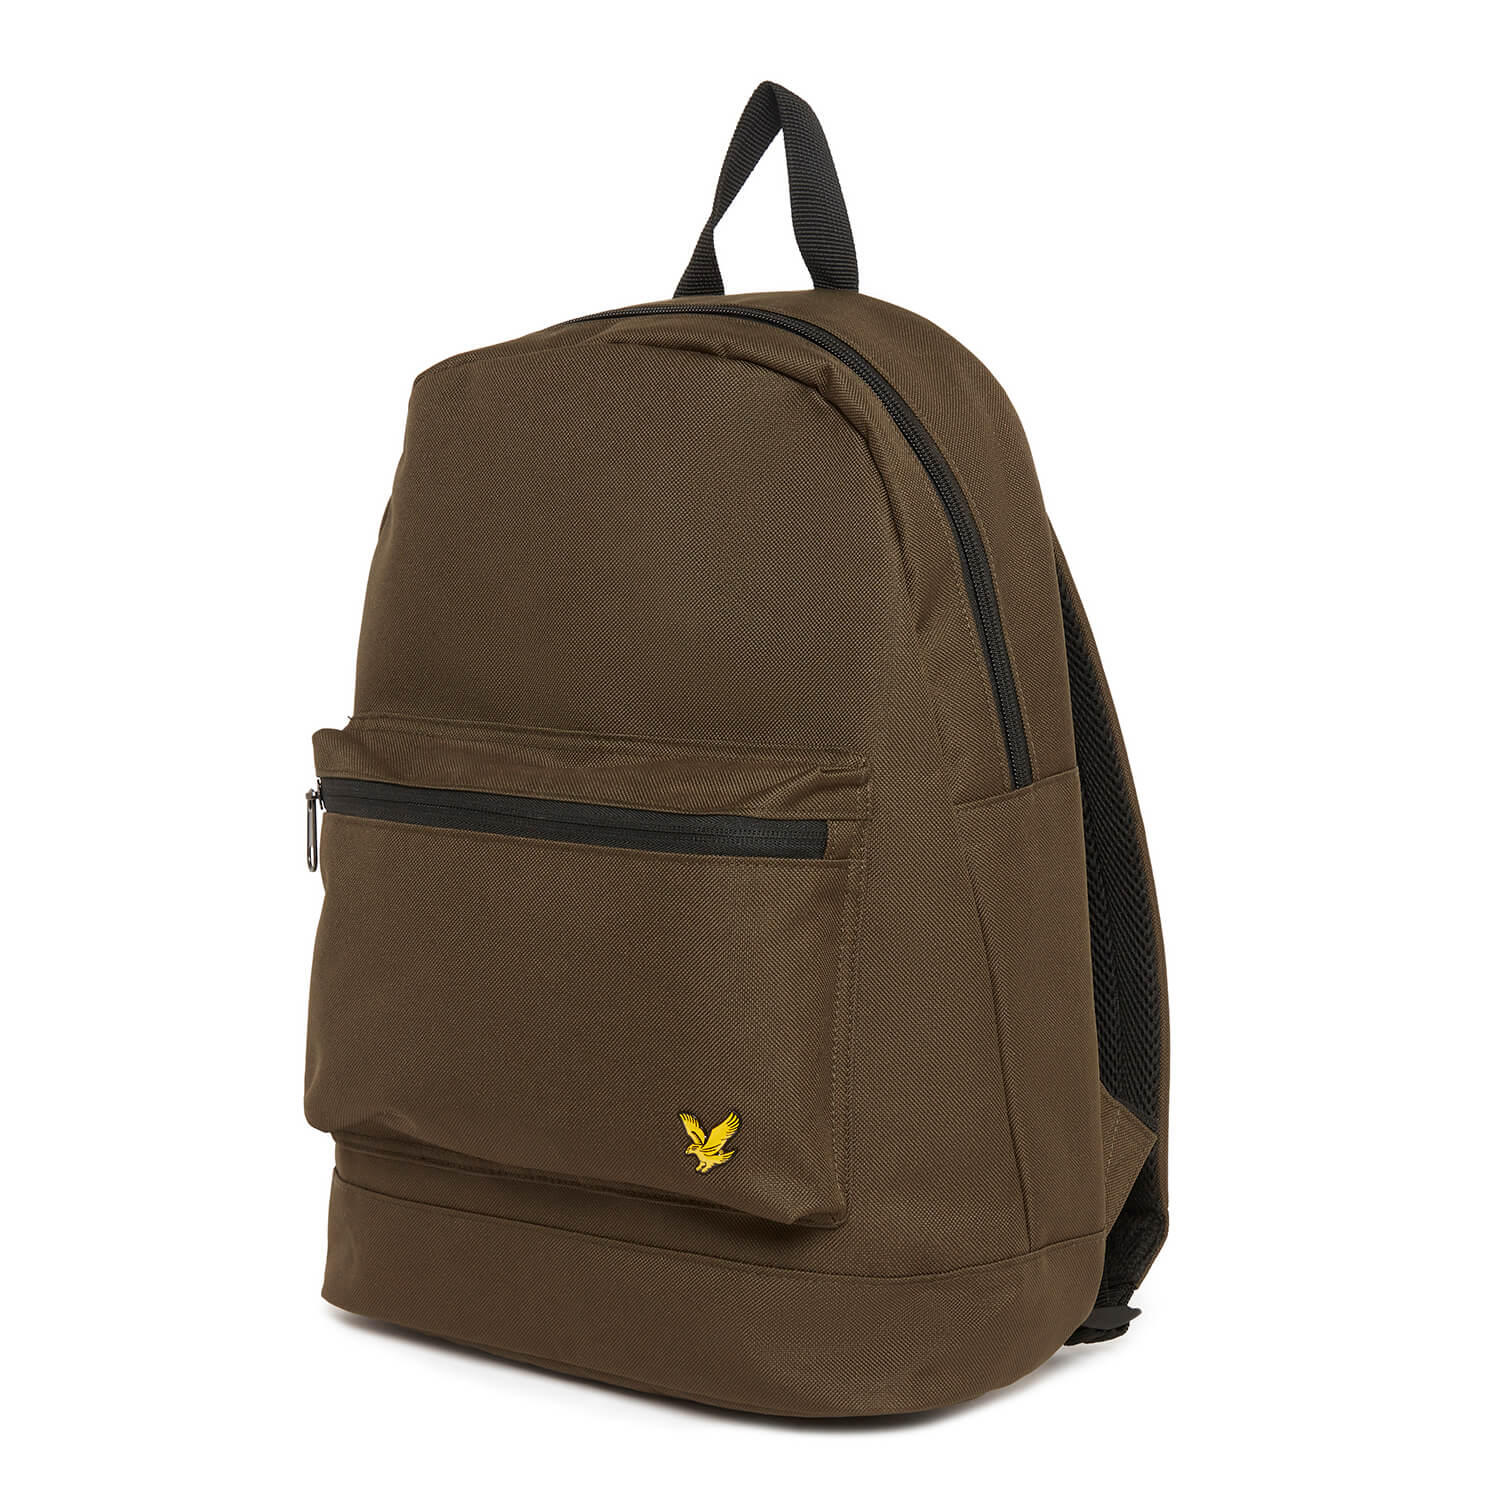 Lyle & Scott Backpack in Olive Green